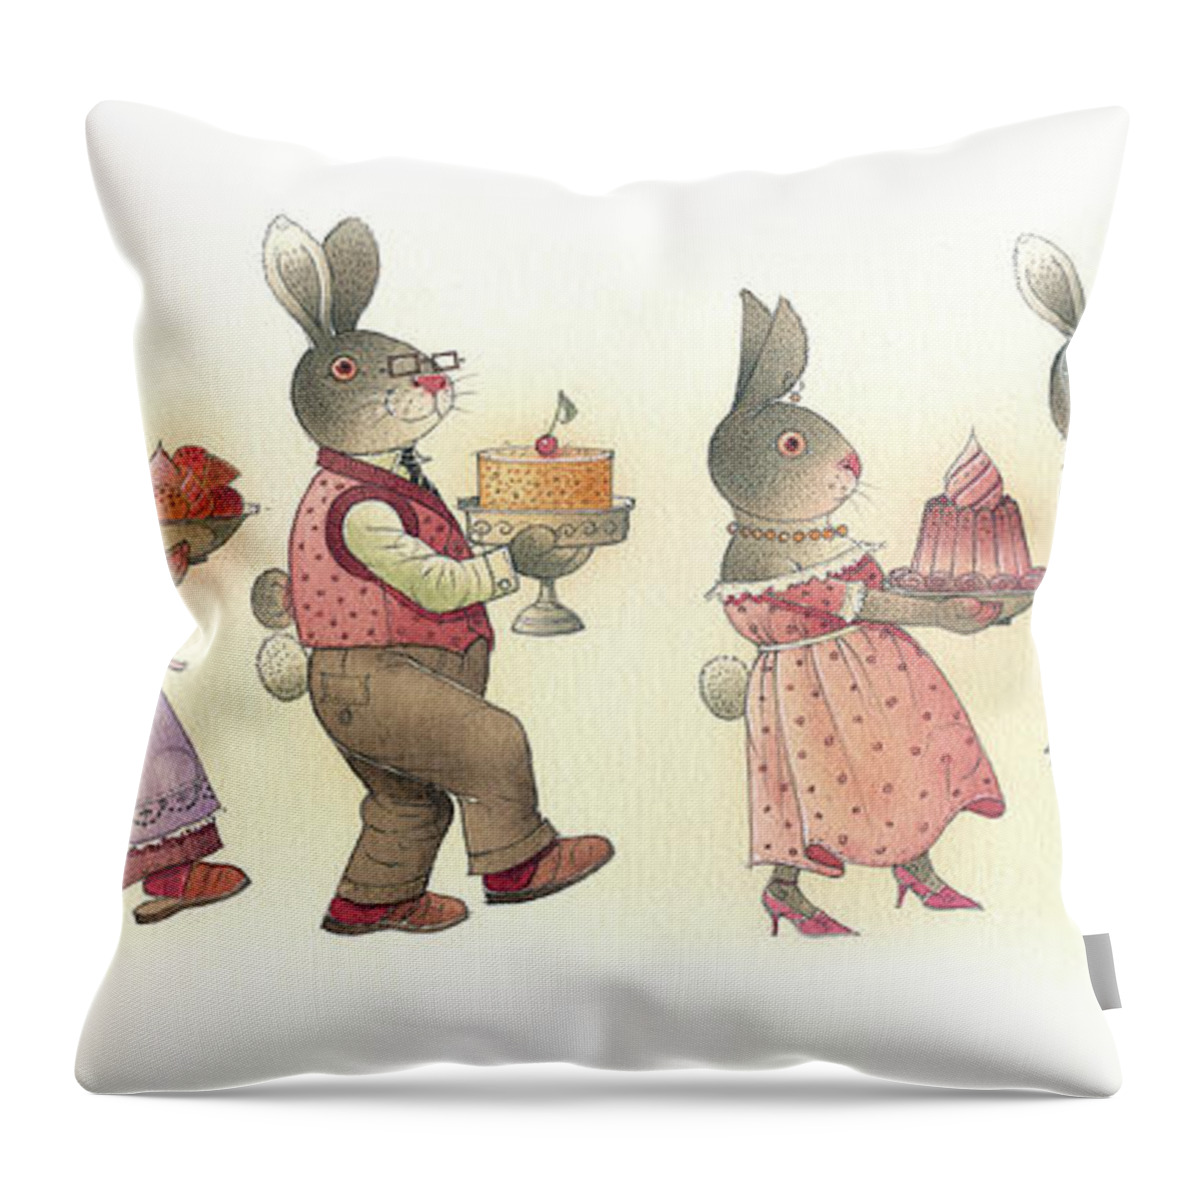 Rabbit Birthday Delicious Animal Holiday Food Party Invitation Cake Pie Throw Pillow featuring the painting Happy Birthday by Kestutis Kasparavicius